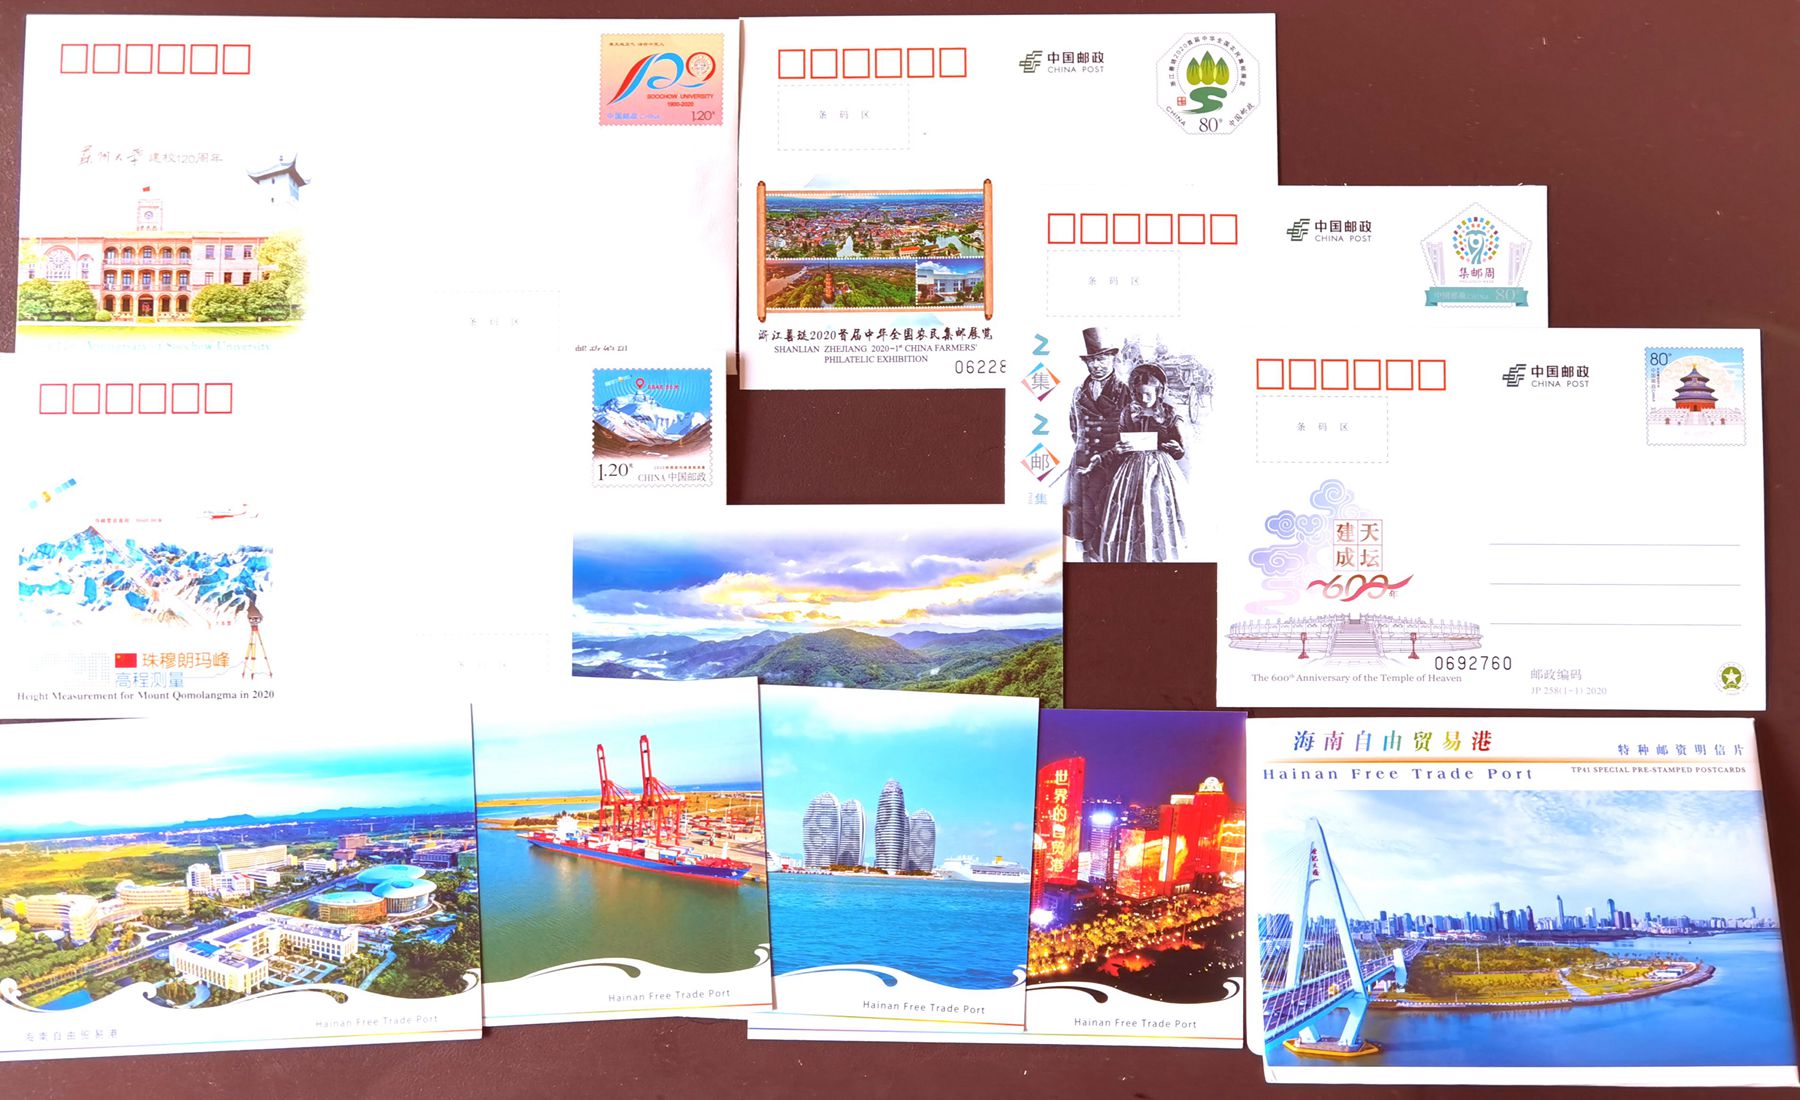 C2020, Complete China 2020 Postal Cards and Envelopes, 10 pcs